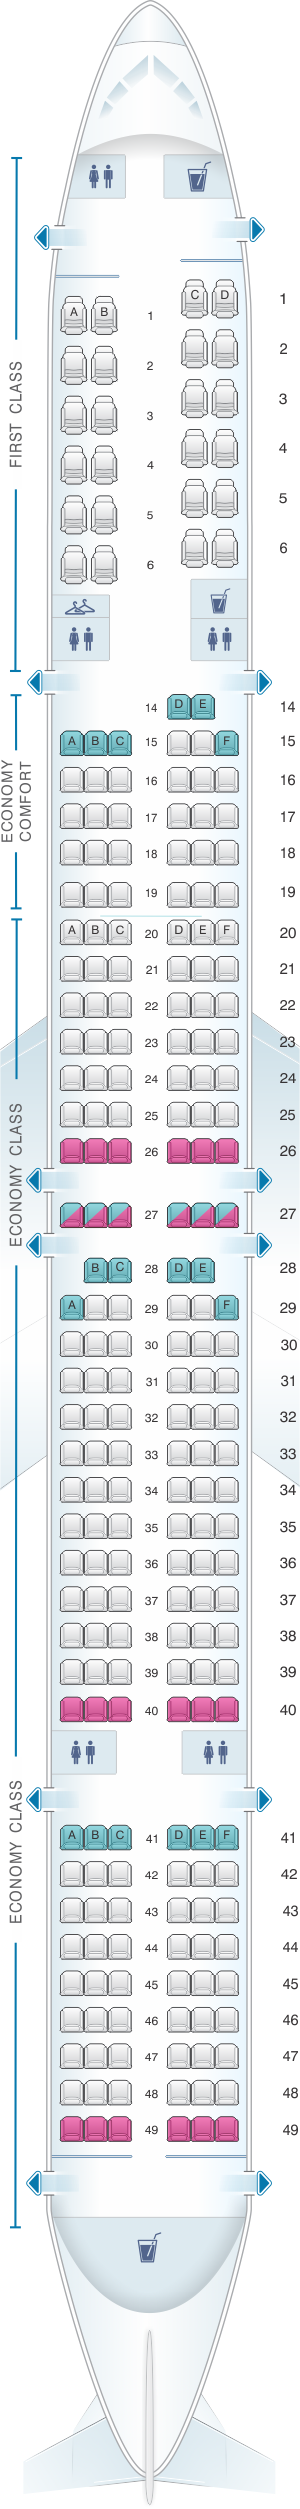 Seat map for Delta Air Lines Boeing B757 300 (75Y)